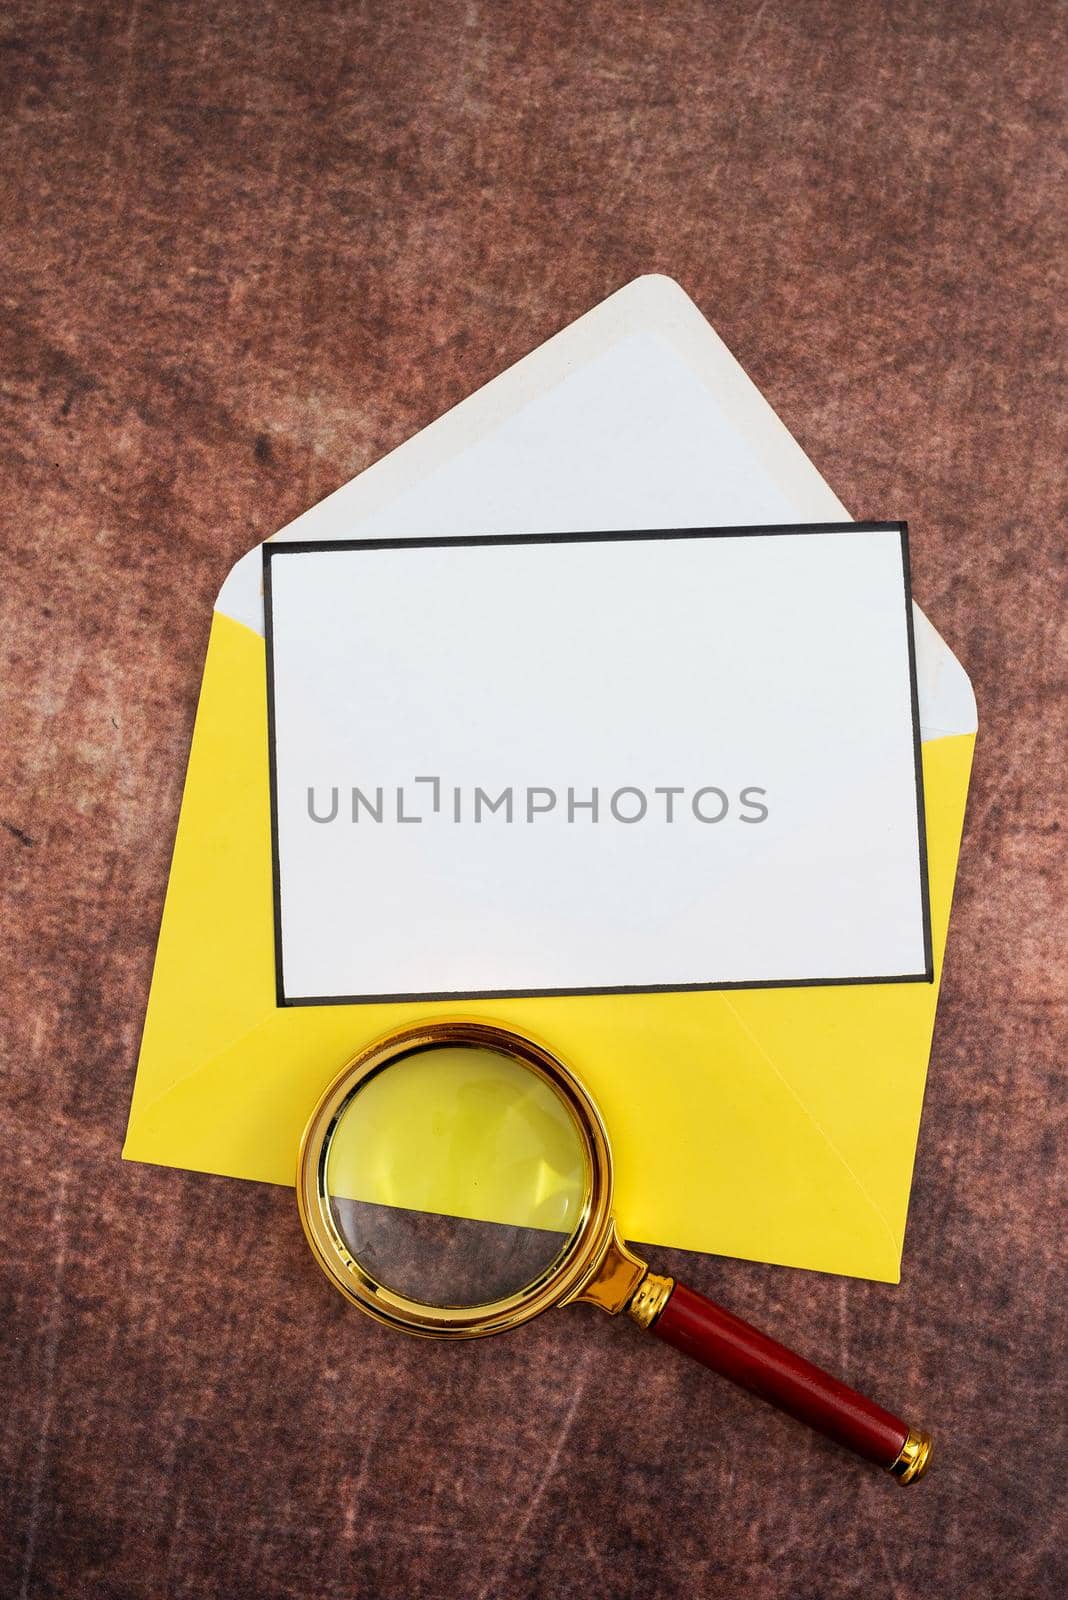 Blank Letter With Color Envelope And Magnifying Glass Placed On Wooden Table. It Is Representing Important Strategies And Crucial Message For Business Progress. by nialowwa